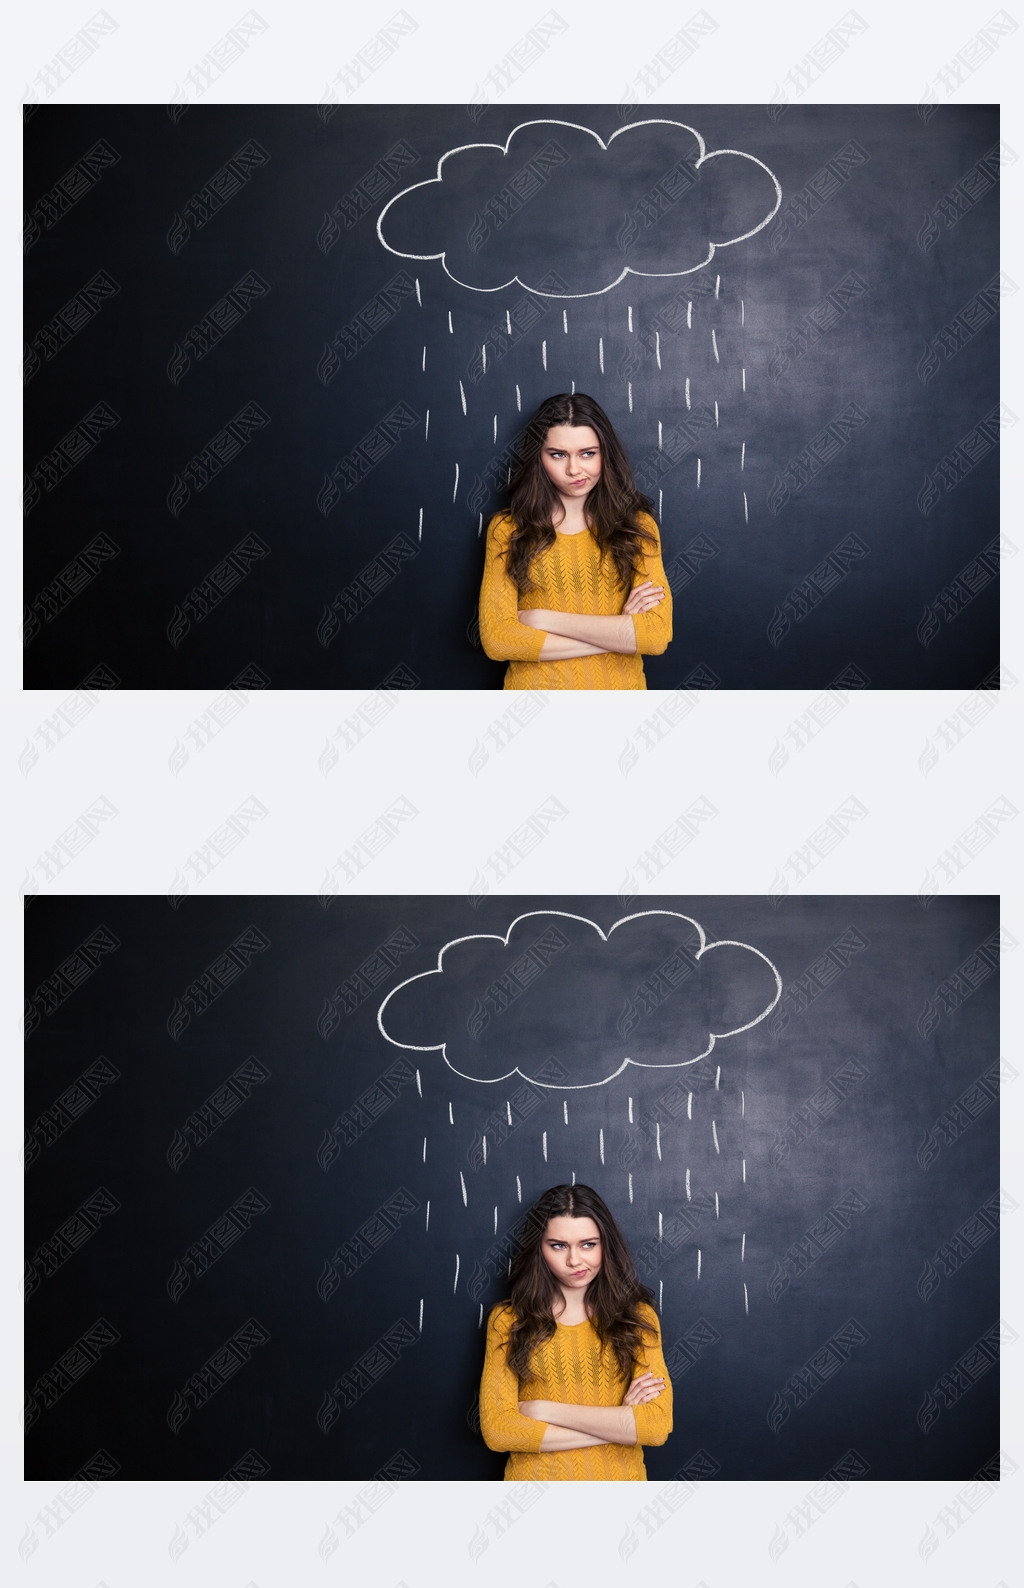 Unpleased woman with raincloud drawn over her on blackboard background 